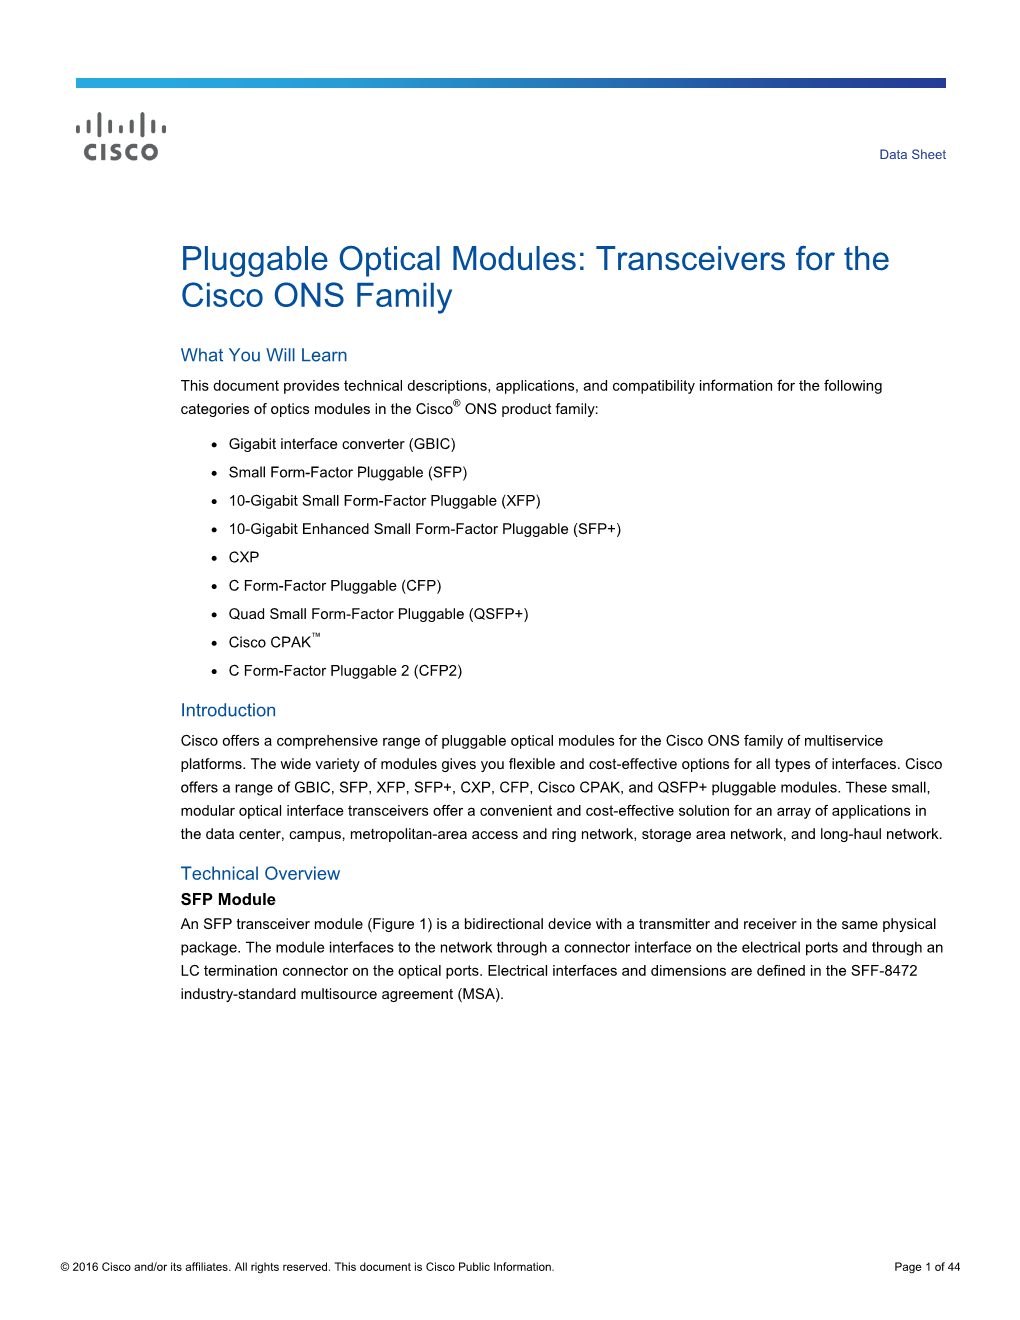 Pluggable Optical Modules: Transceivers for the Cisco ONS Family